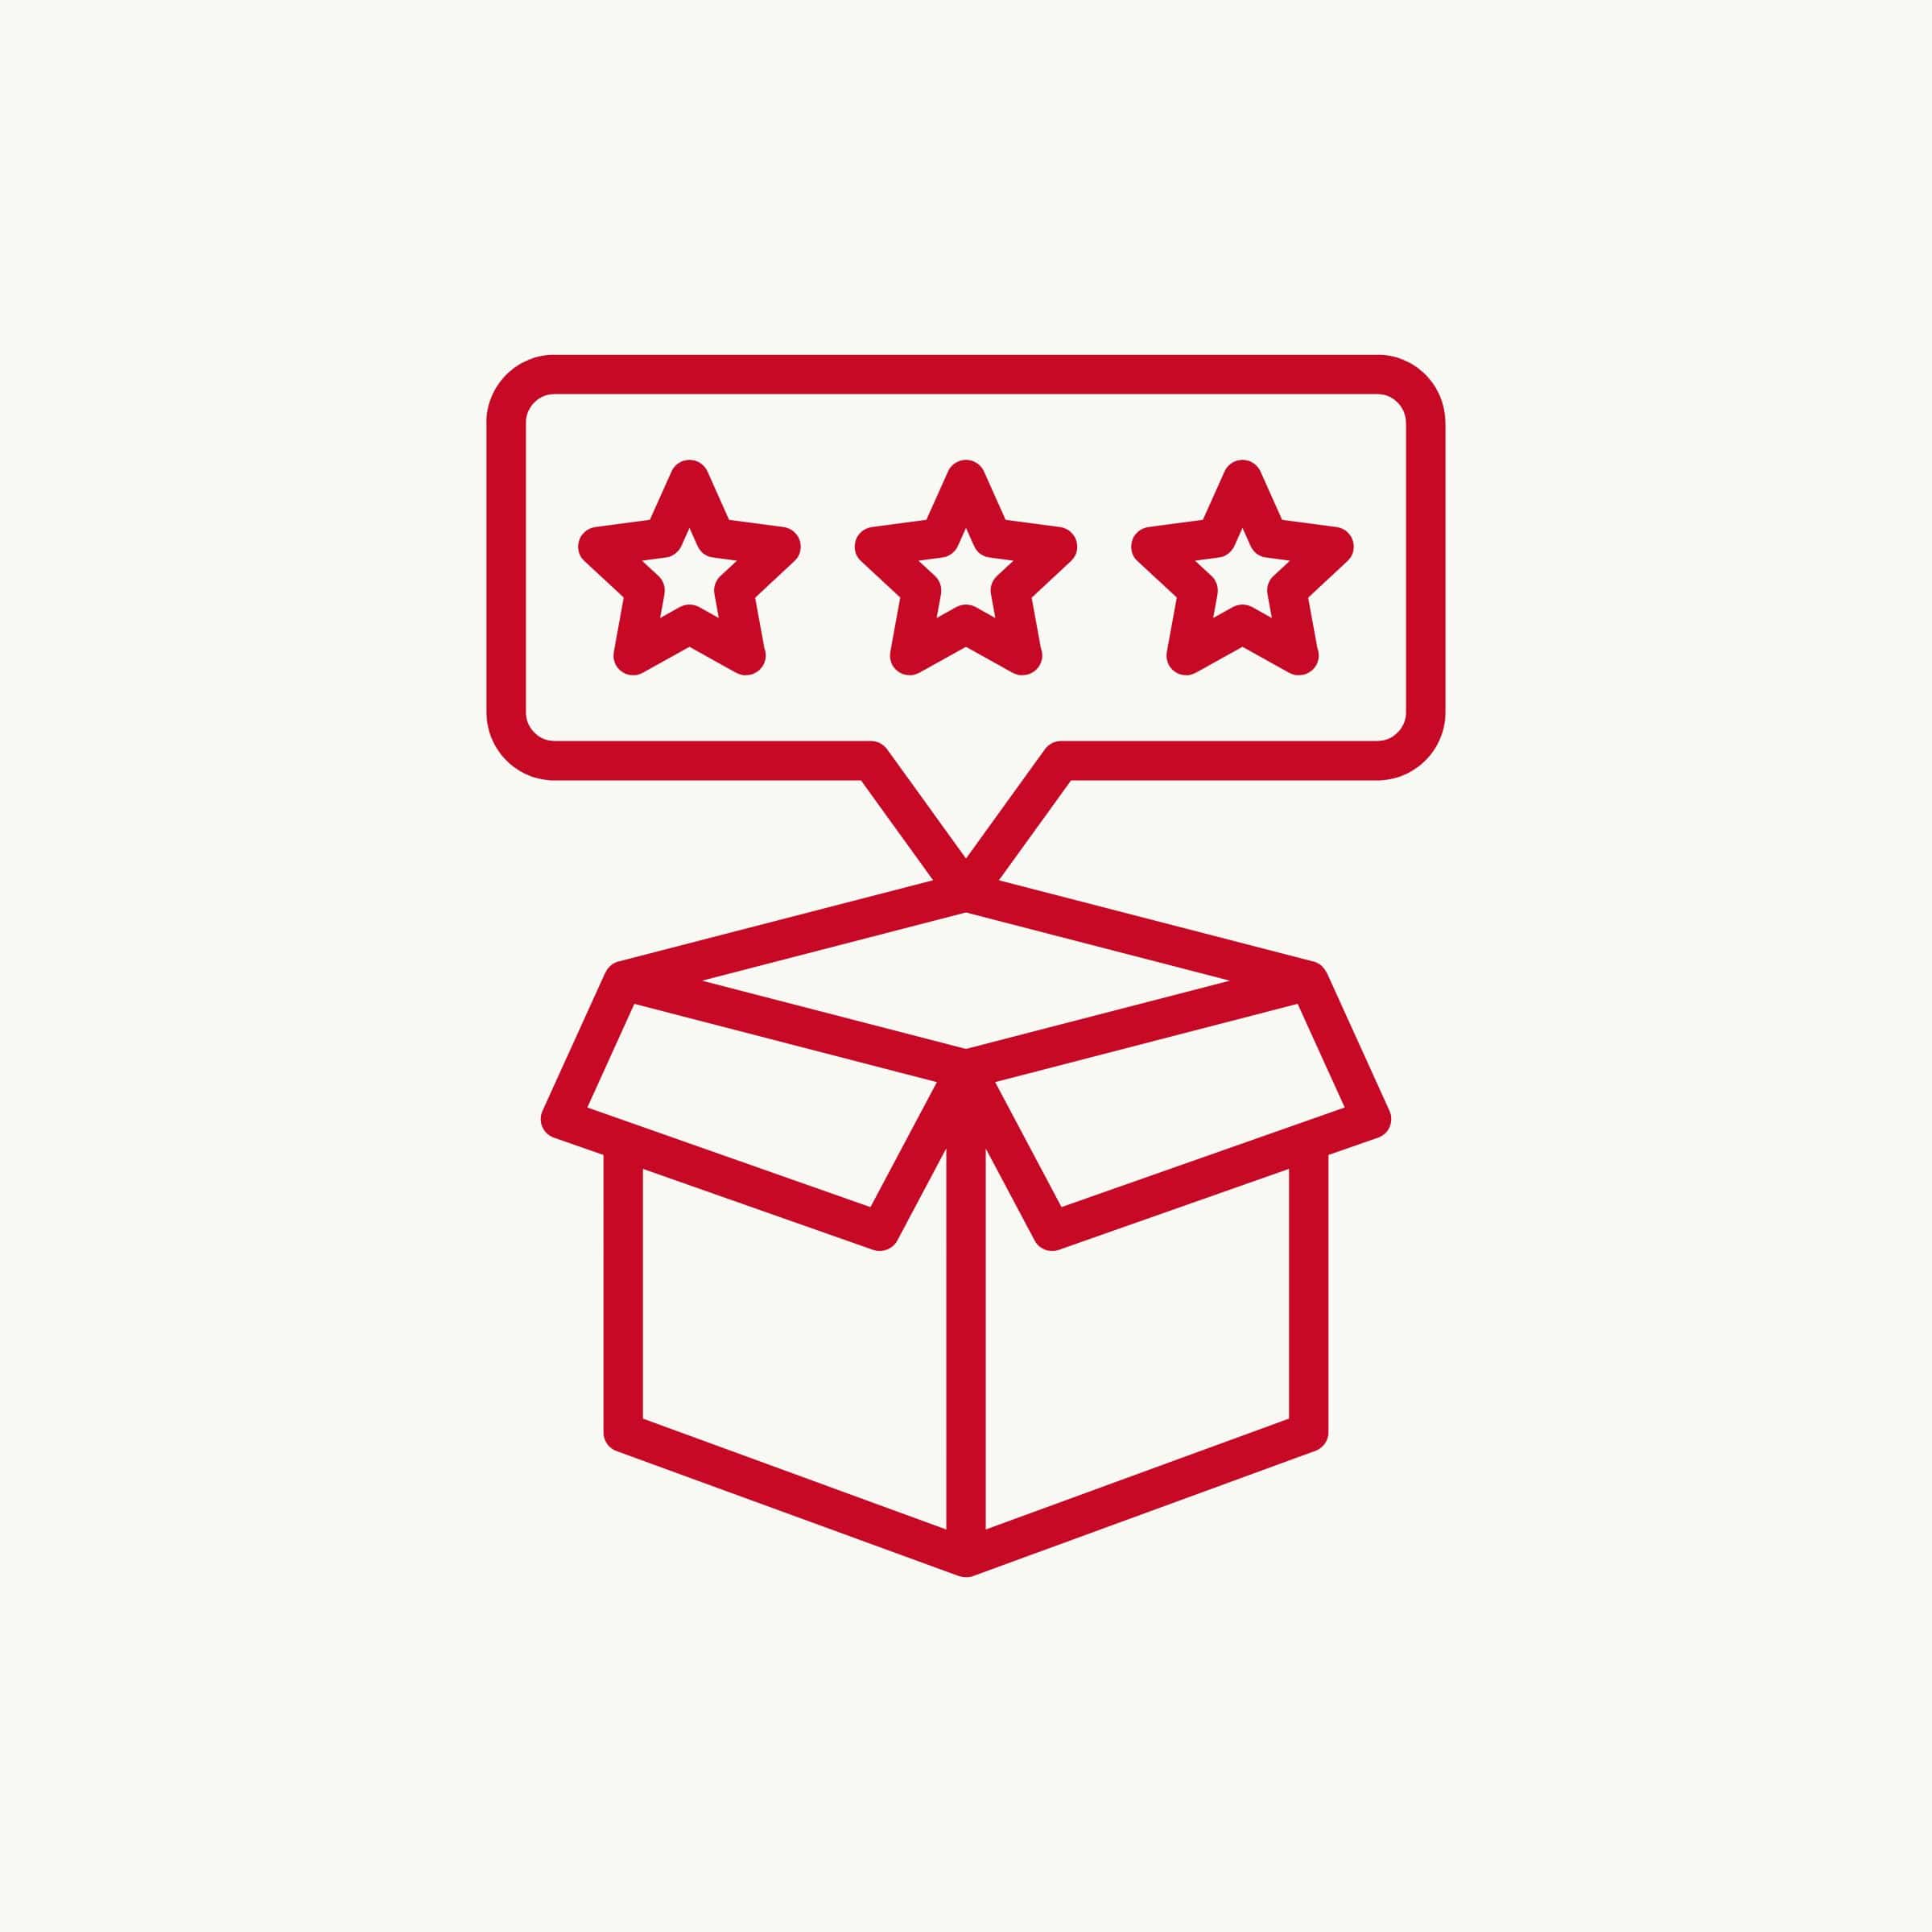 box with stars in a speech bubble icon